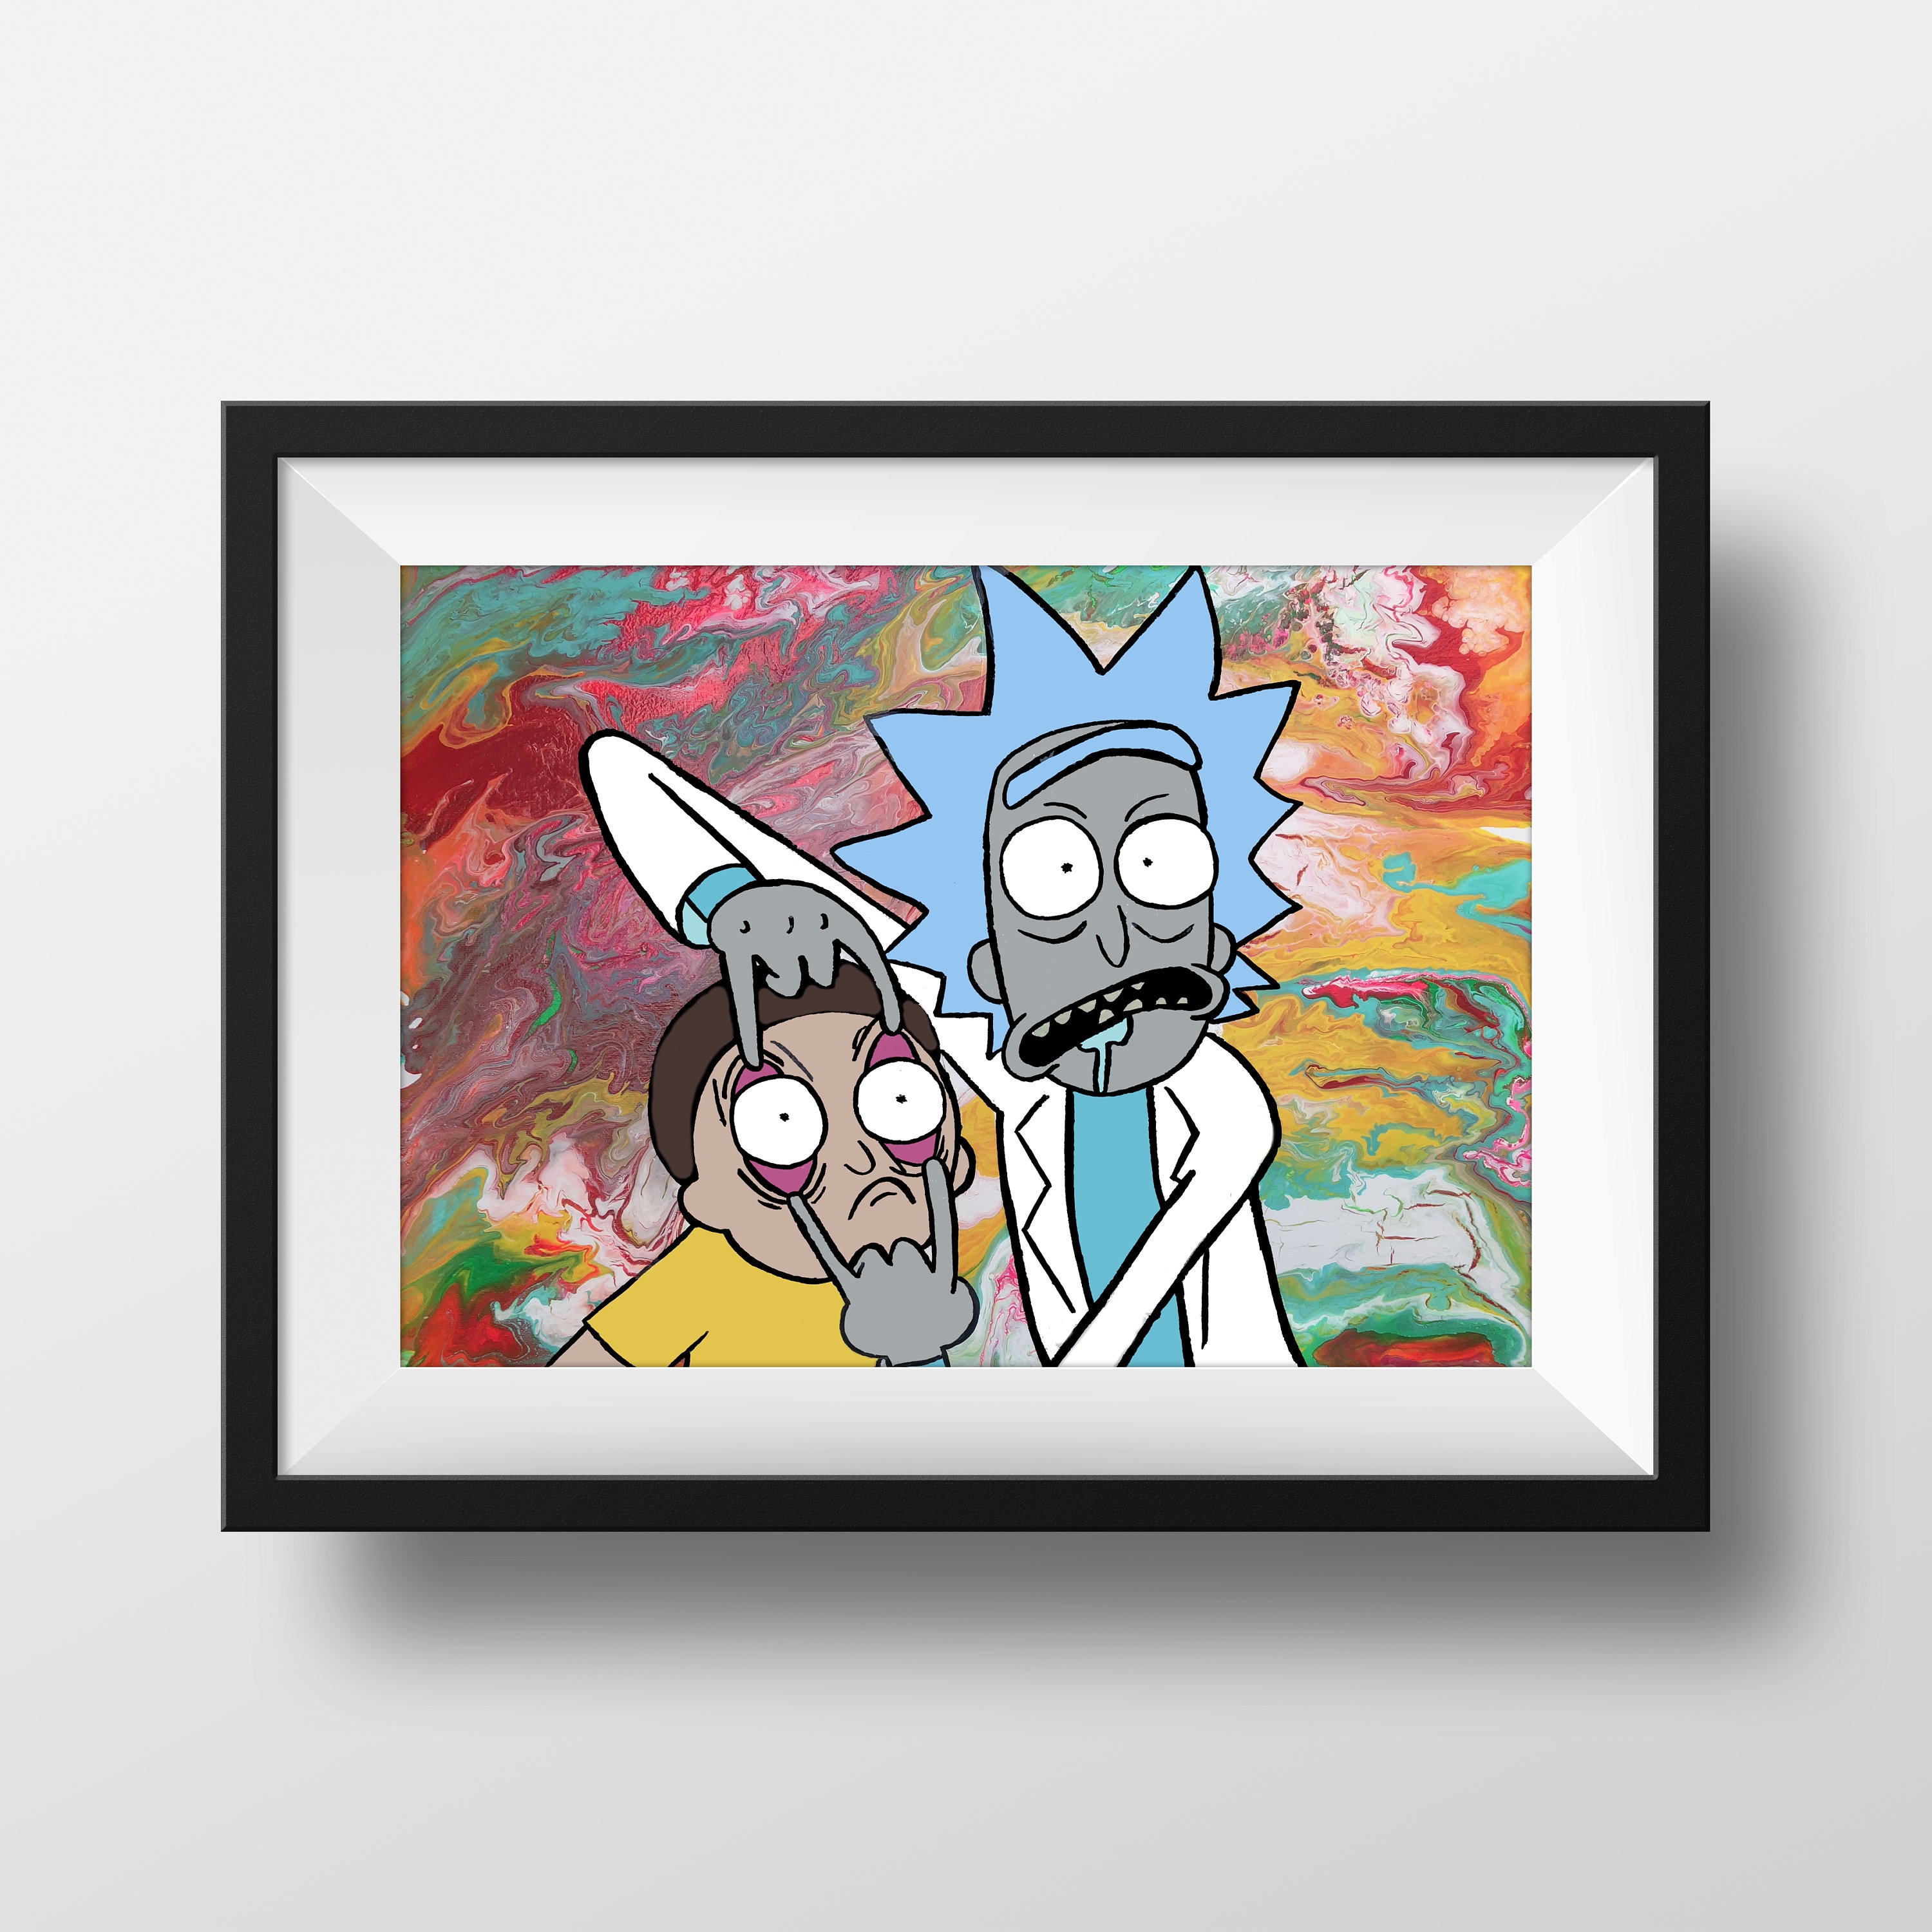 Rick and Morty / Cartoon Art Poster / Fluid Painting / Print / - Etsy